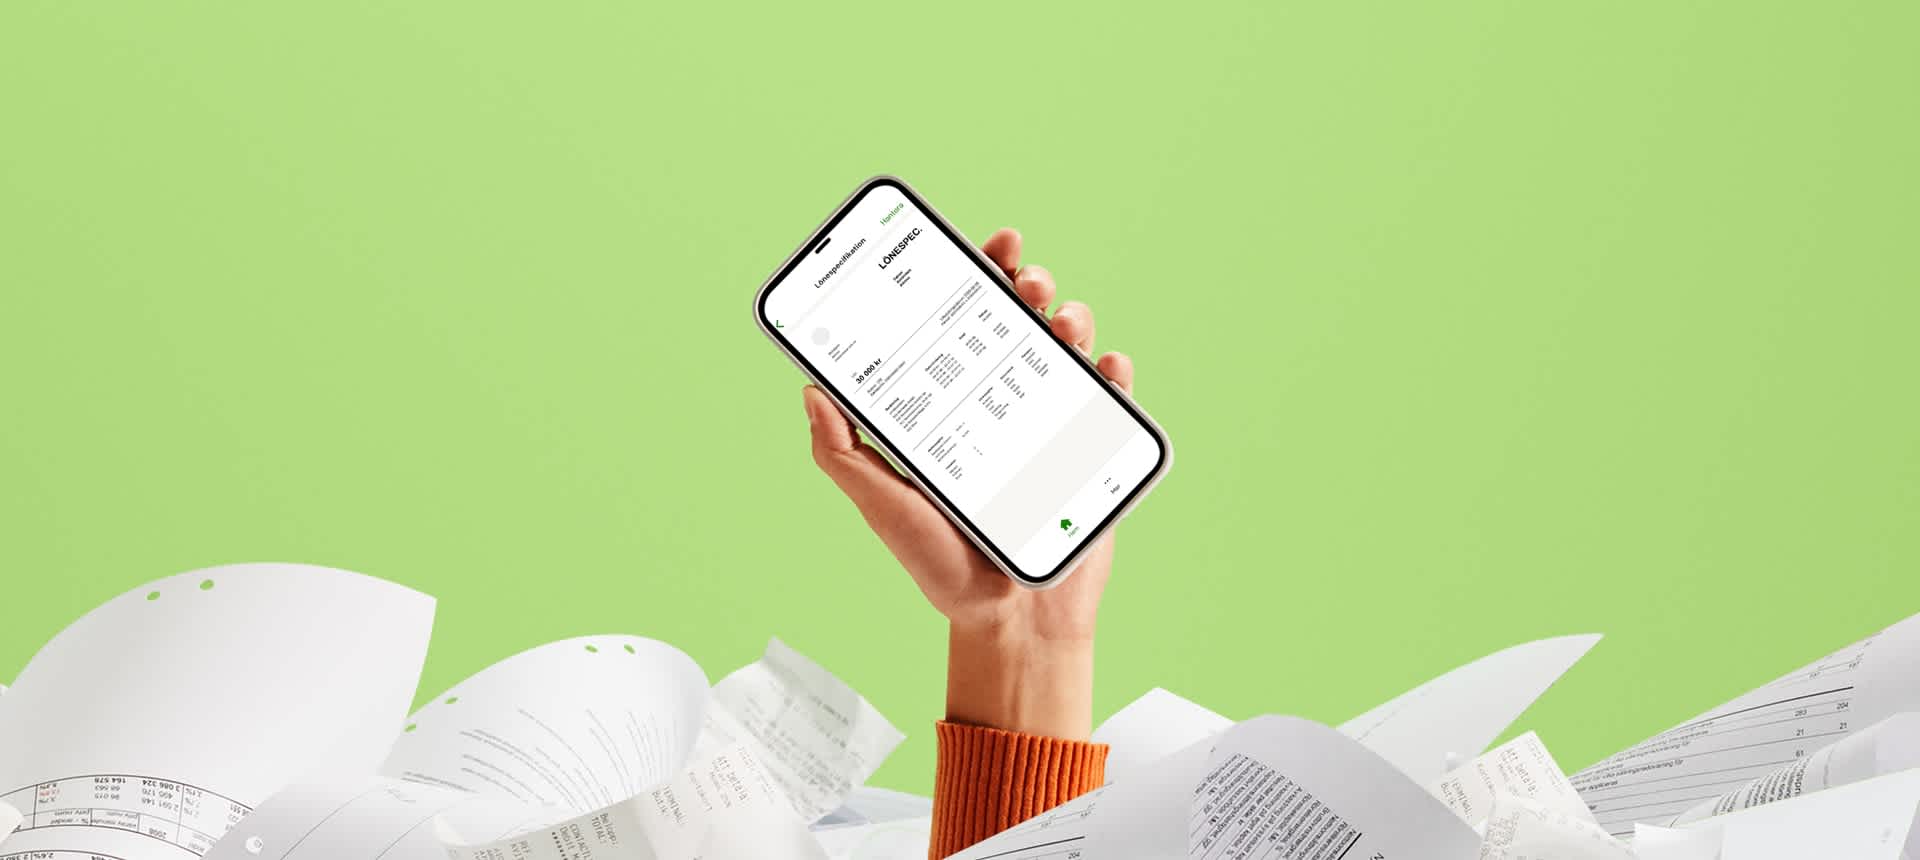 A hand holding a mobile phone with a payslip in Kivra's app on the screen.